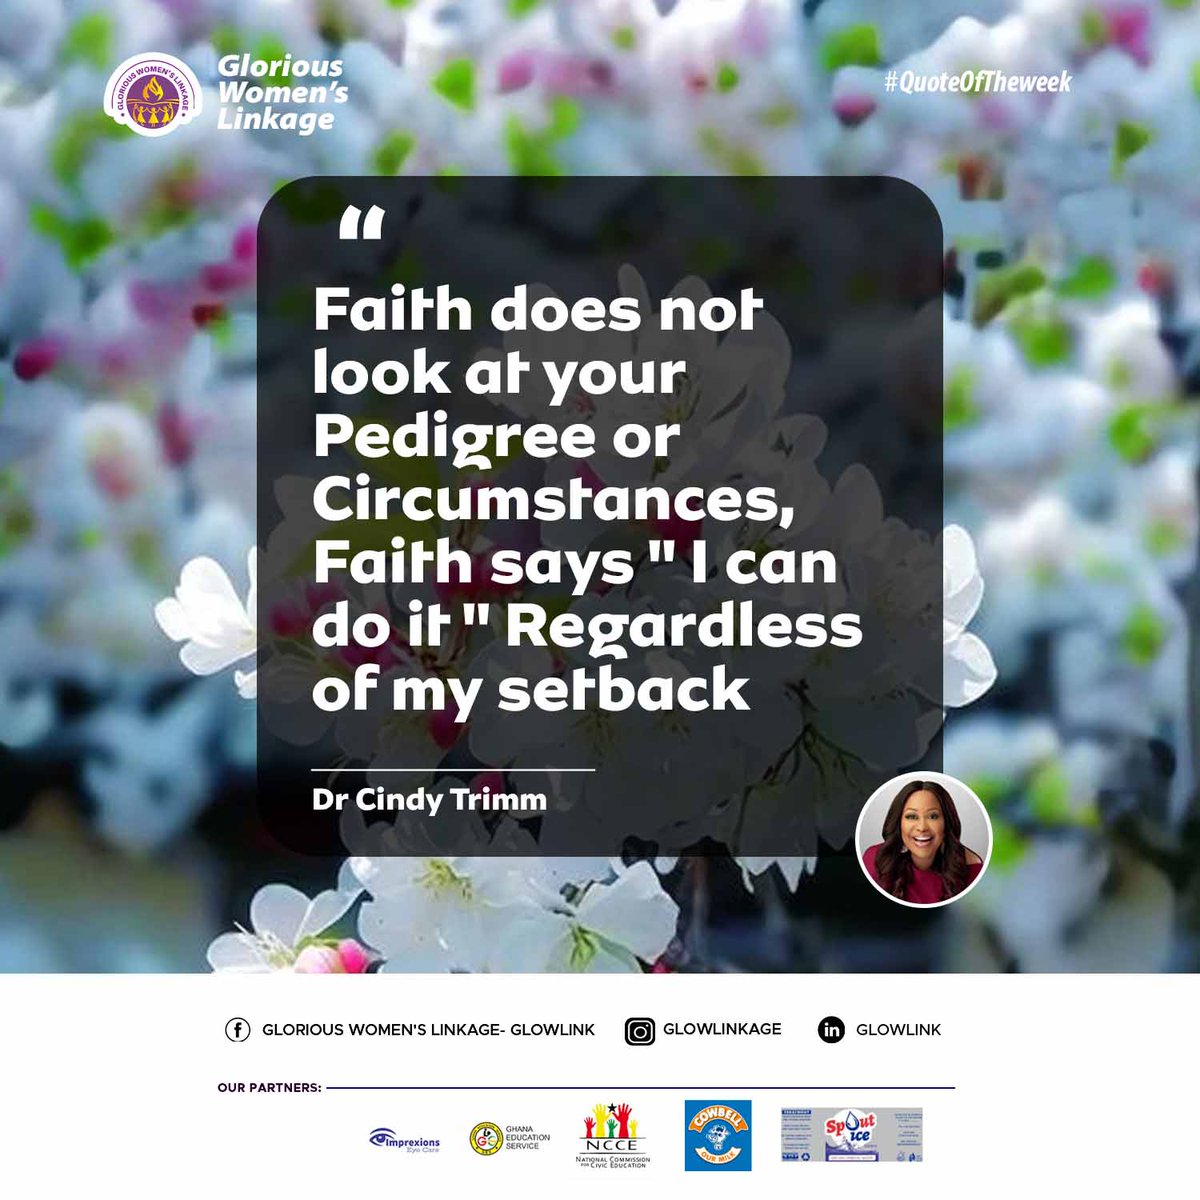 Faith does not look at your Pedigree or Circumstances, Faith says ' I can do it ' Regardless of my setback

Dr. Cindy Trimm

#GLOWLINK #FaithOverCircumstances #BelieveInYourself #OvercomeSetbacks #faithquotes